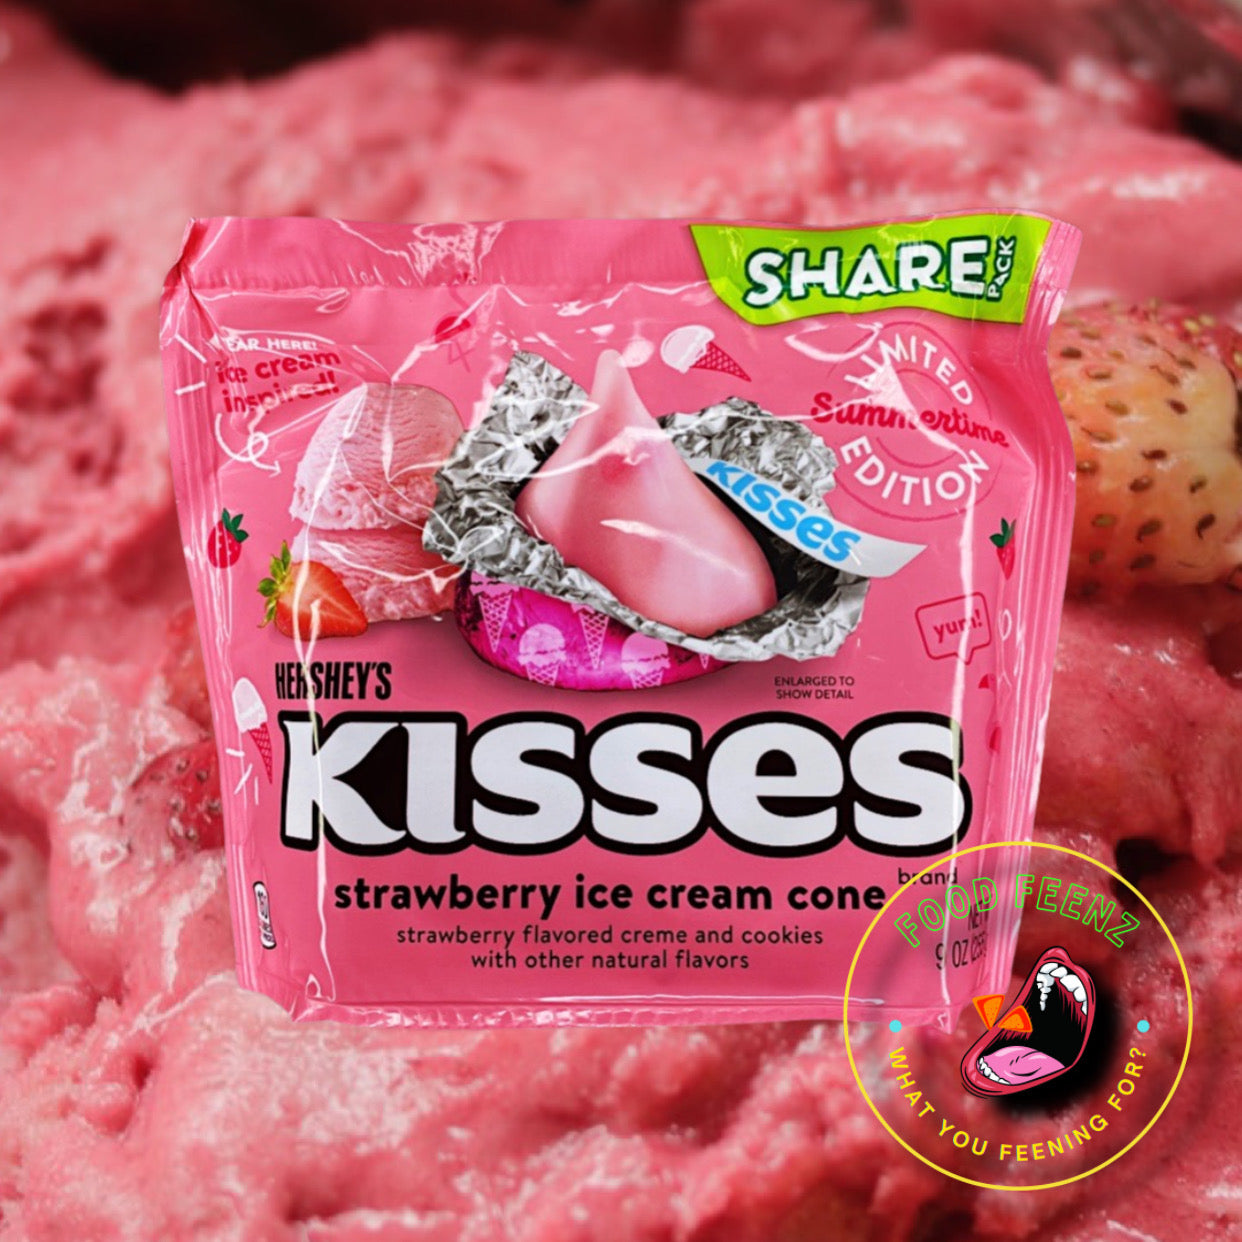 Hershey's Kisses Strawberry Ice Cream Cone (Limited Summertime Edition)